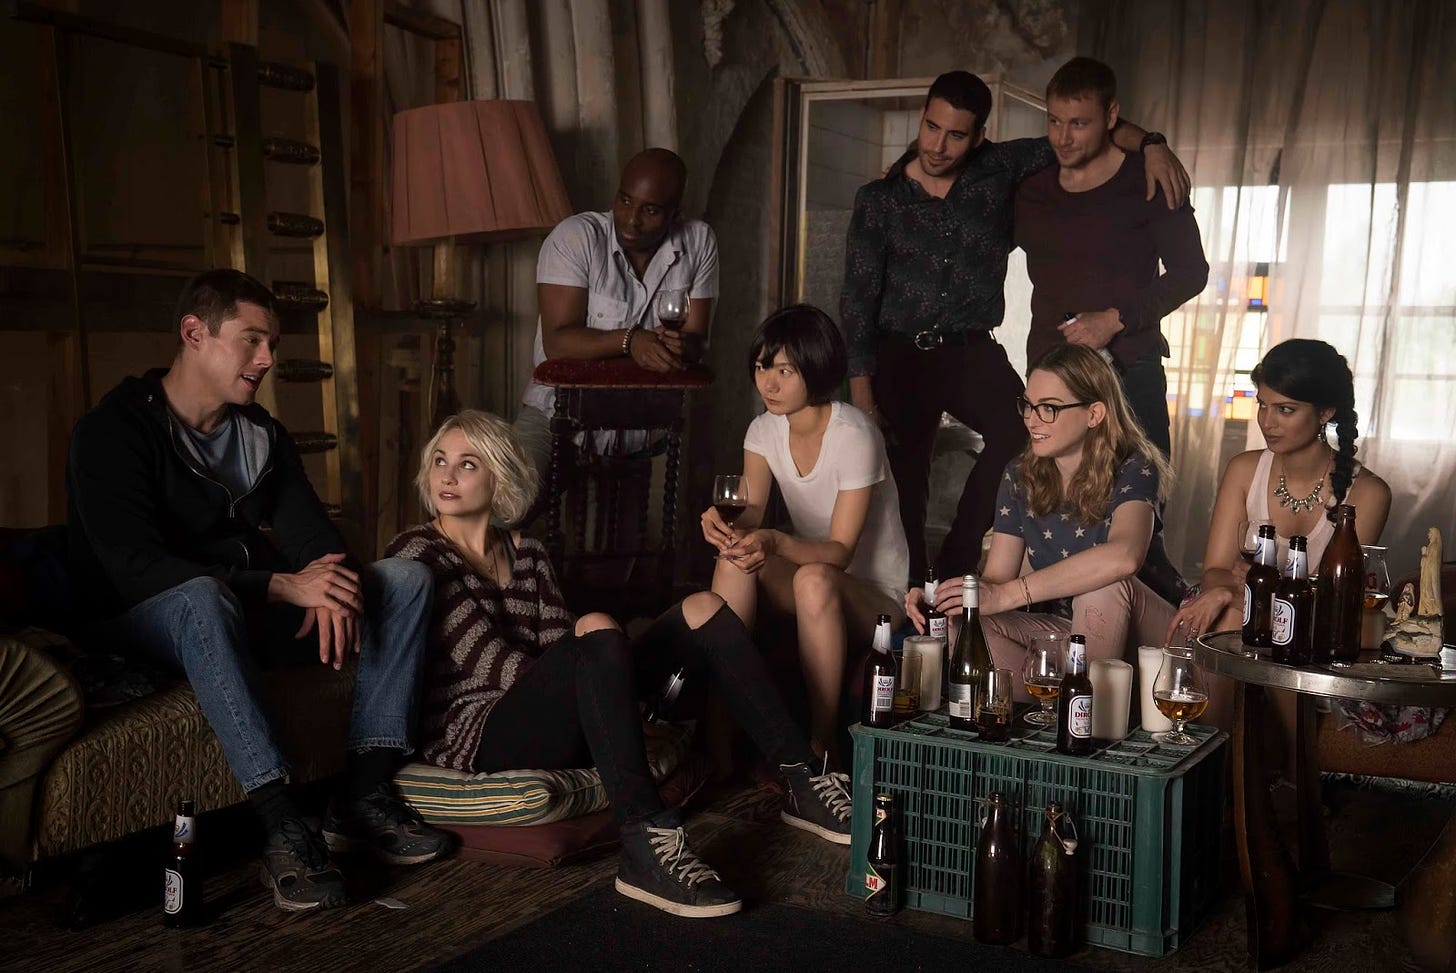 Scene from the TV series "Sense8" by the Wachowskis